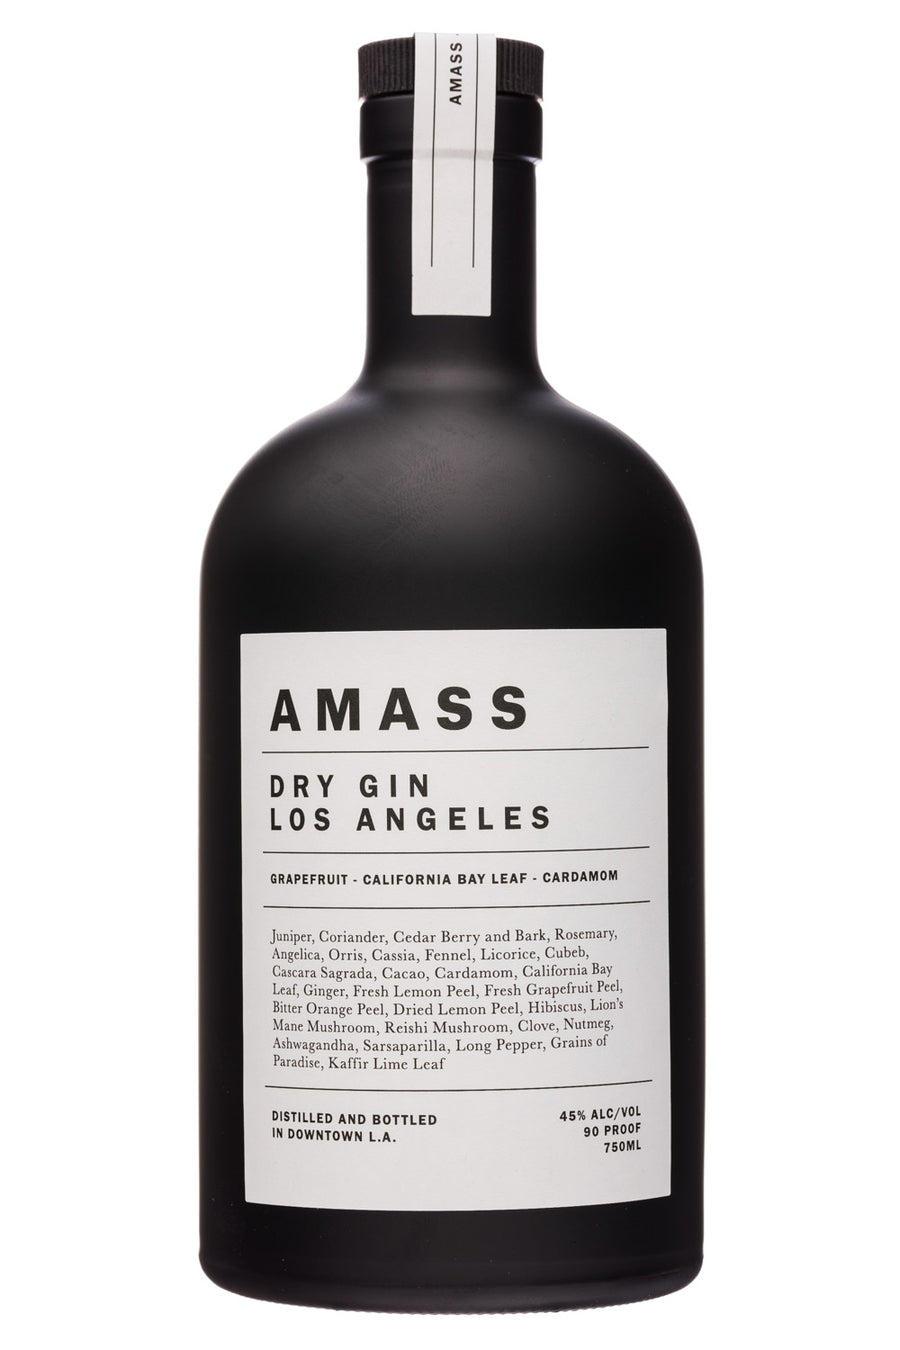 Amass Dry Gin Los Angeles